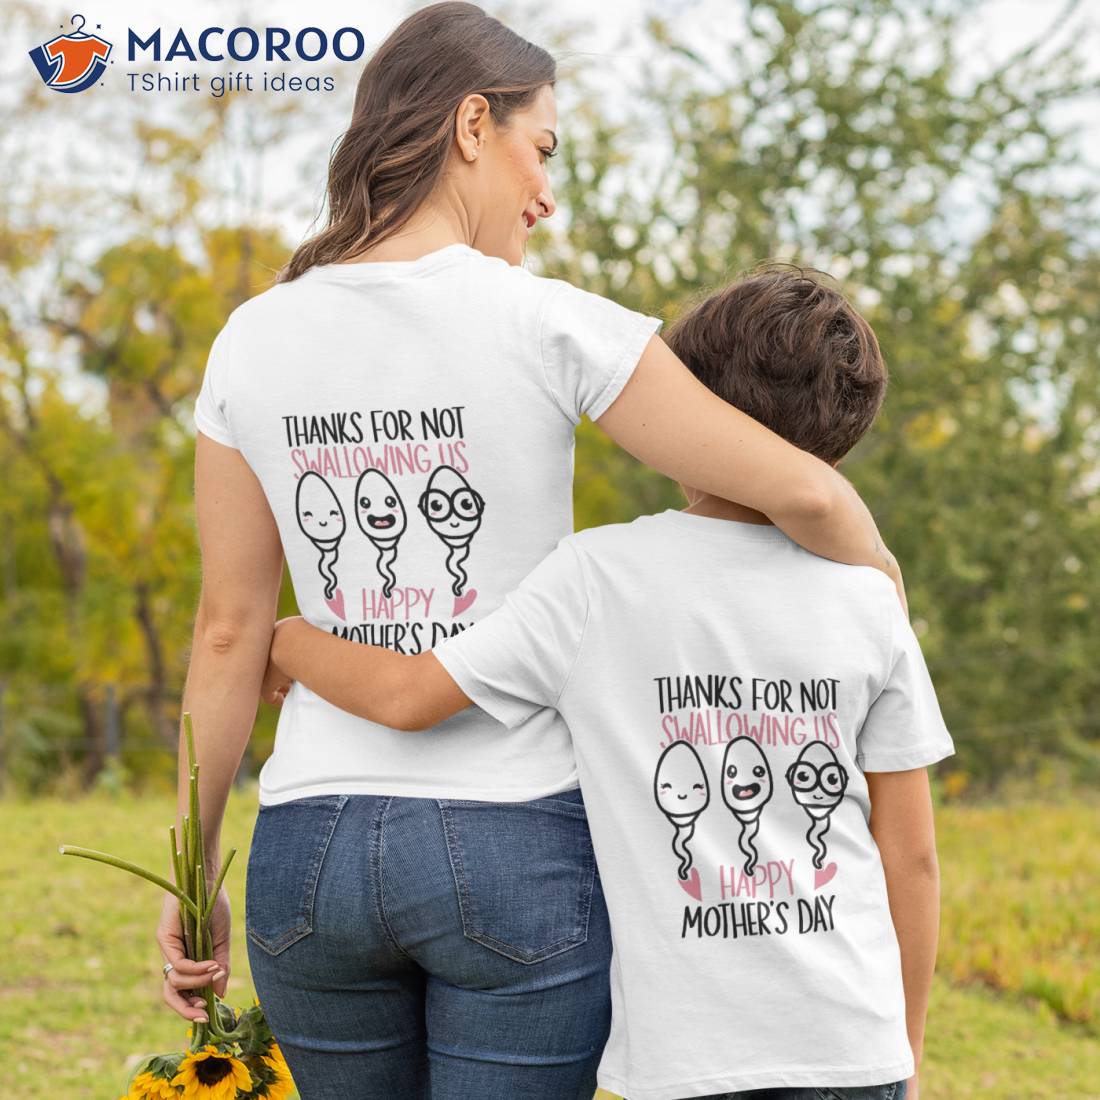 https://images.macoroo.com/wp-content/uploads/2023/05/thank-for-not-swallowing-us-happy-mother-s-day-2023-funny-mom-t-shirt-tshirt-2.jpg